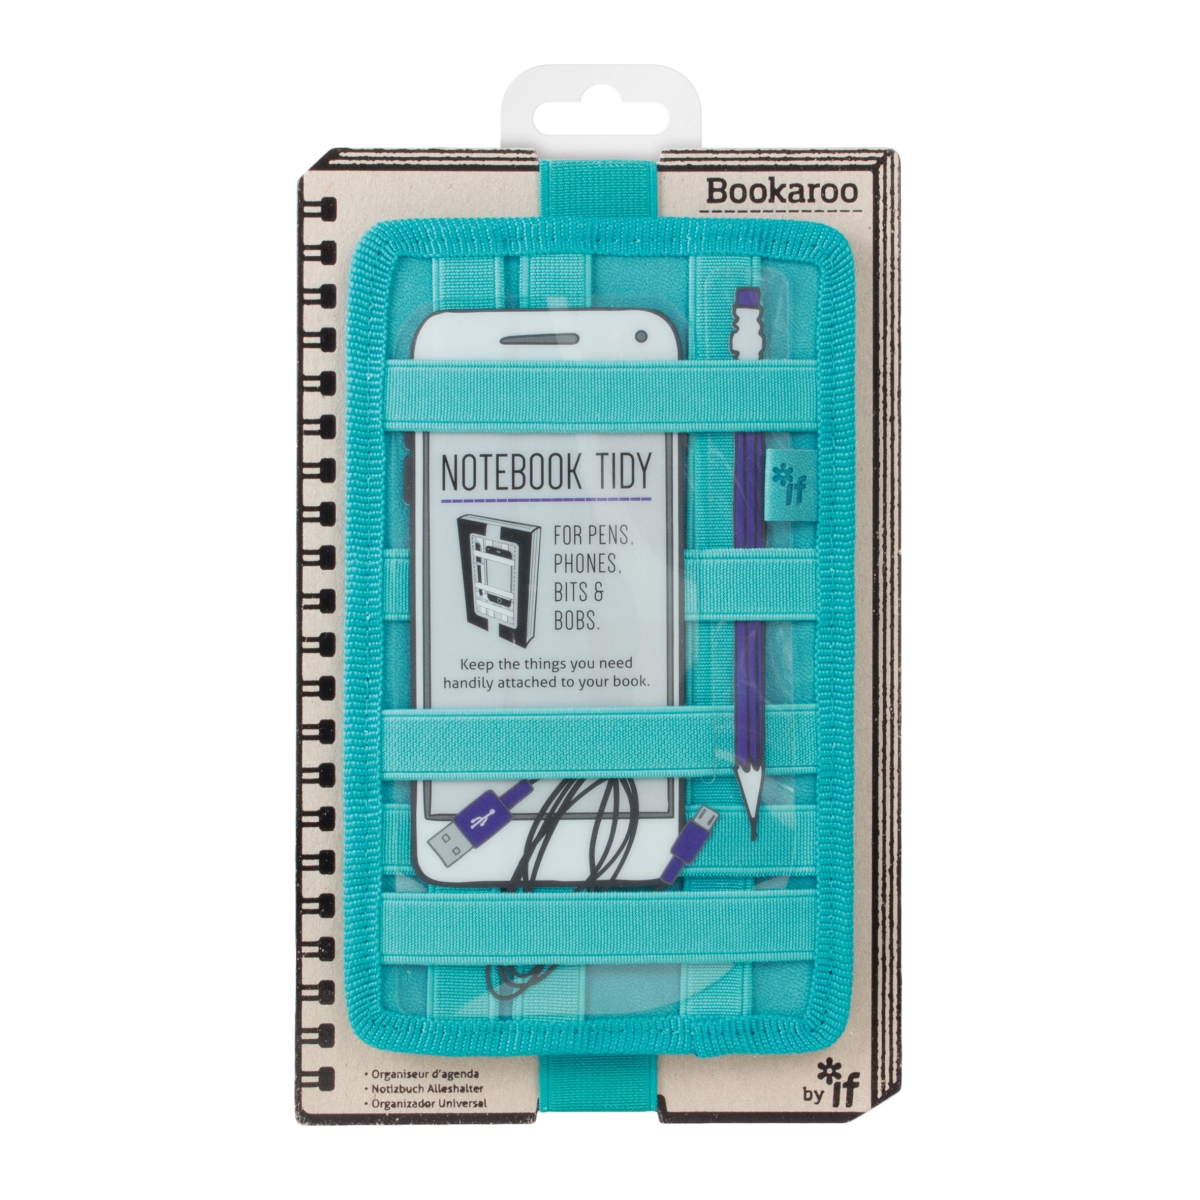 Picture of If USA 40905 Bookaroo Notebook Tidy Cases, Turquoise